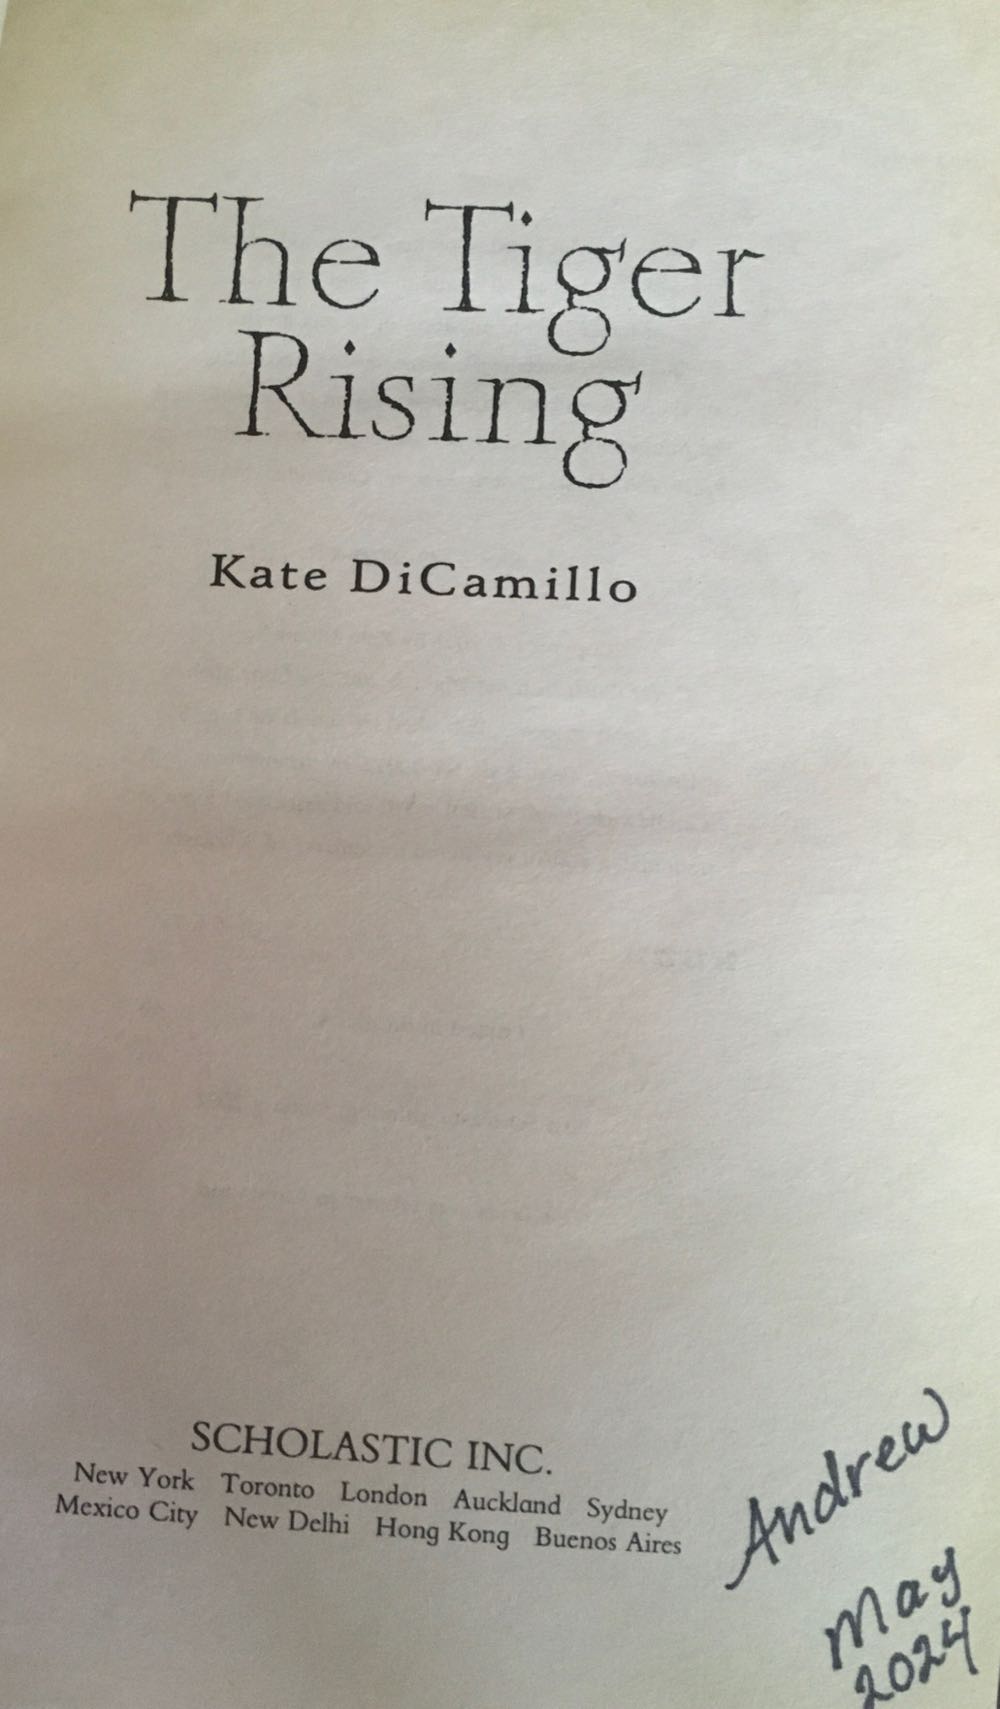 The Tiger Rising - Kate DiCamillo (Scholastic - Paperback) book collectible [Barcode 9780439389952] - Main Image 4